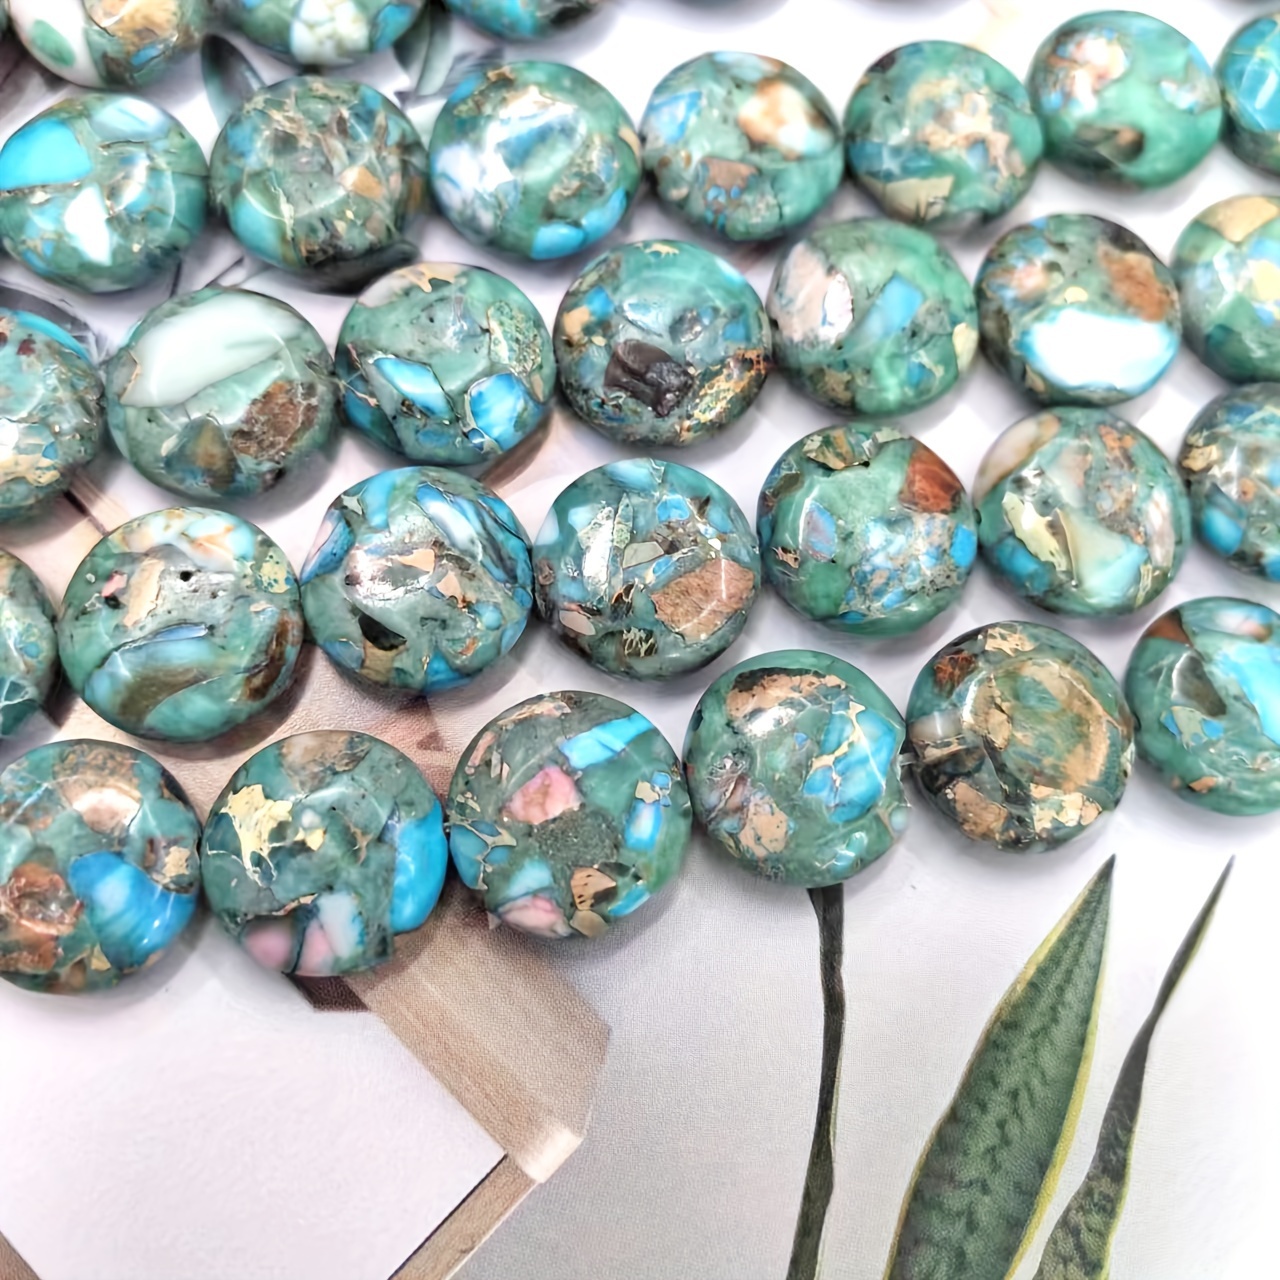 

1 String 11pcs Round Turquoise Blue Emperor Pine Stone Bohemian Style Beads For Handmade Diy Special Unique Fashion Bracelets Necklaces Sweater Chains Jewelry Making Craft Supplies